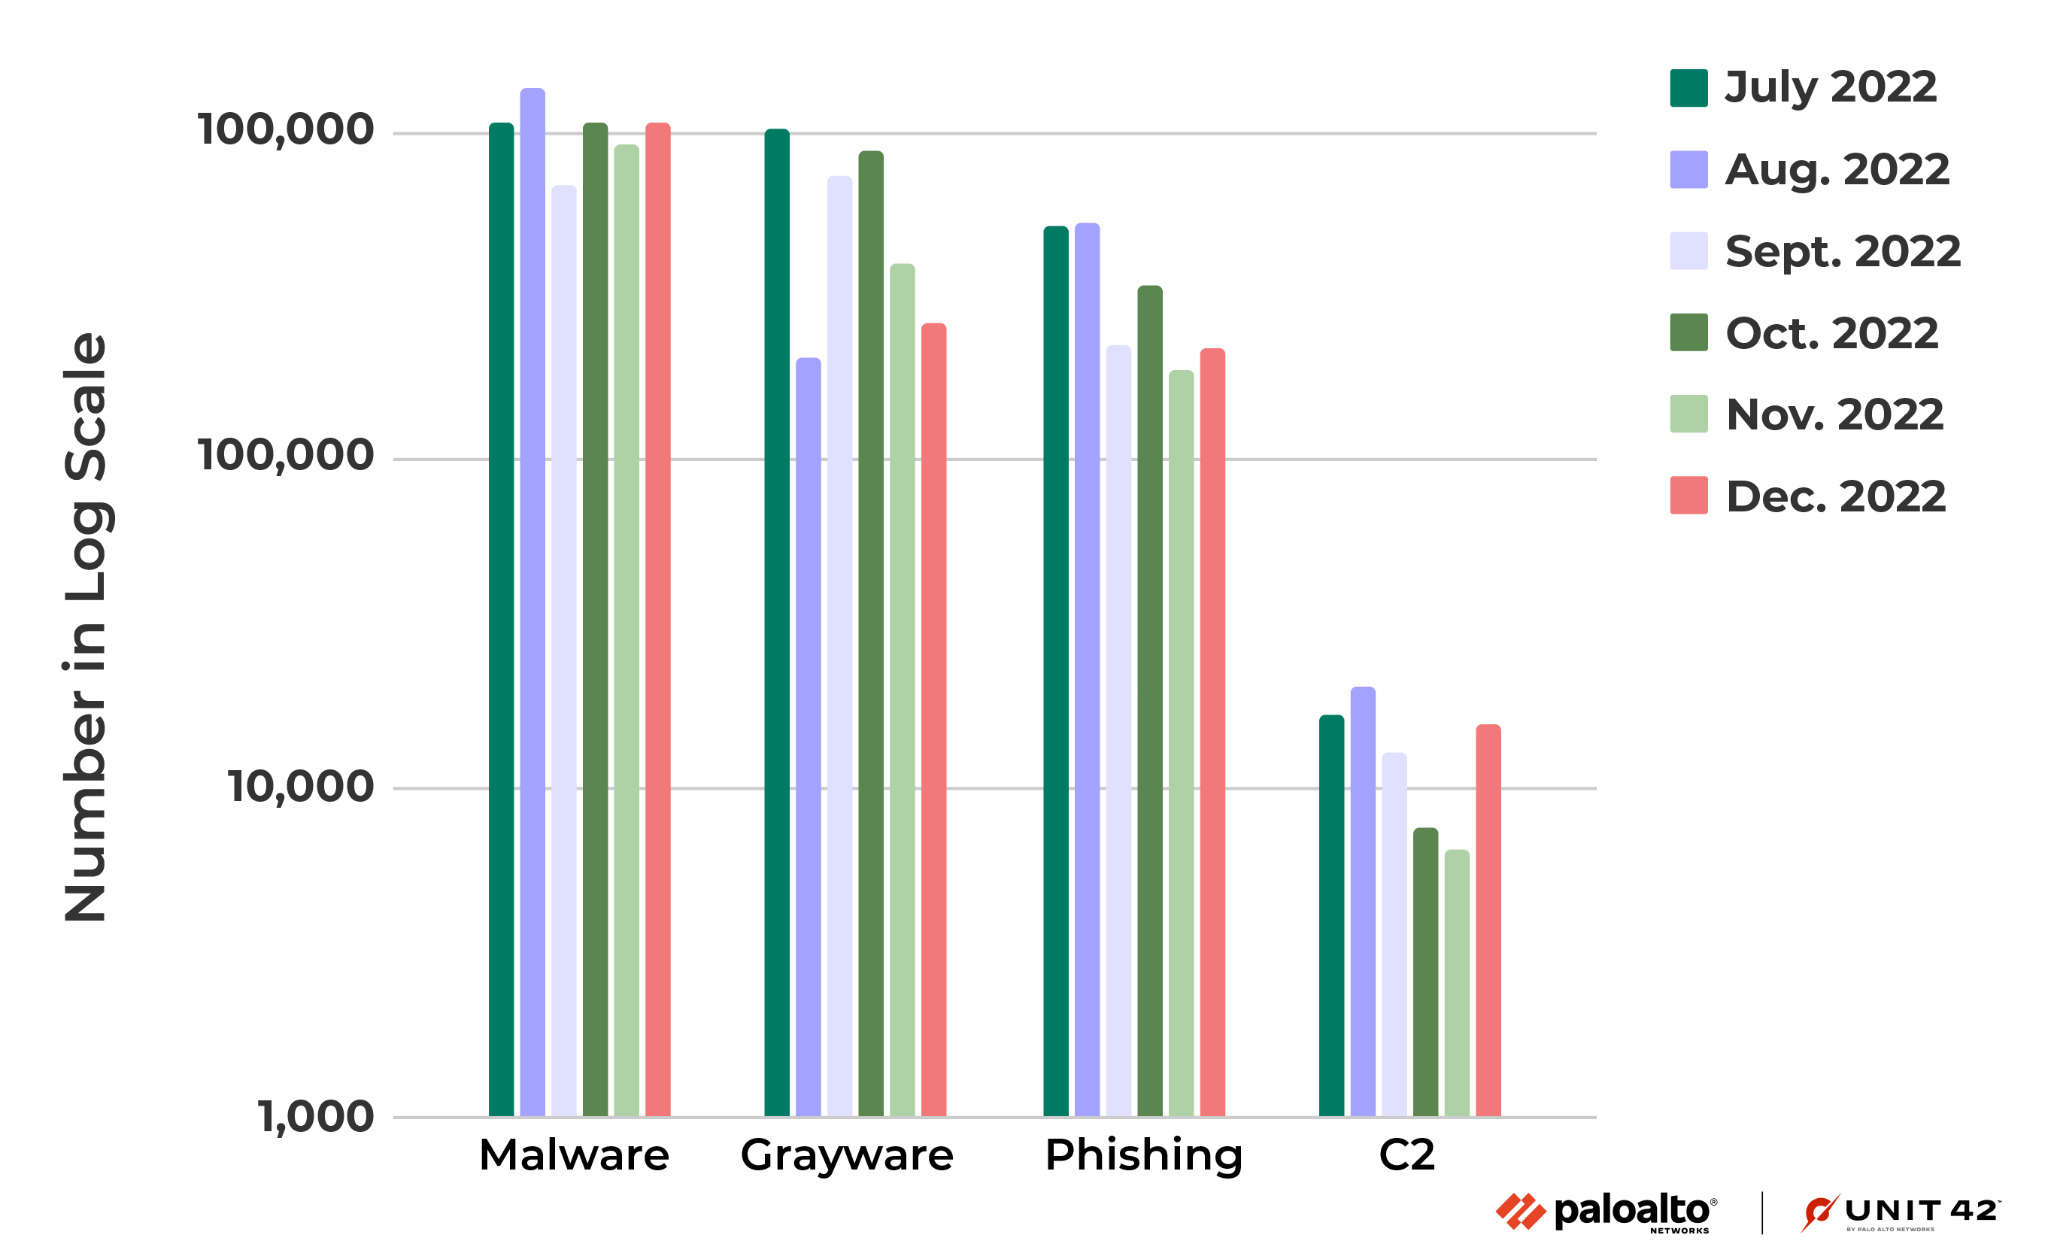 Image 3 is a column chart comparing the number of malicious domains observed from July to December 2022. Like figure 2, the largest percentage is malware, and the smallest is C2.